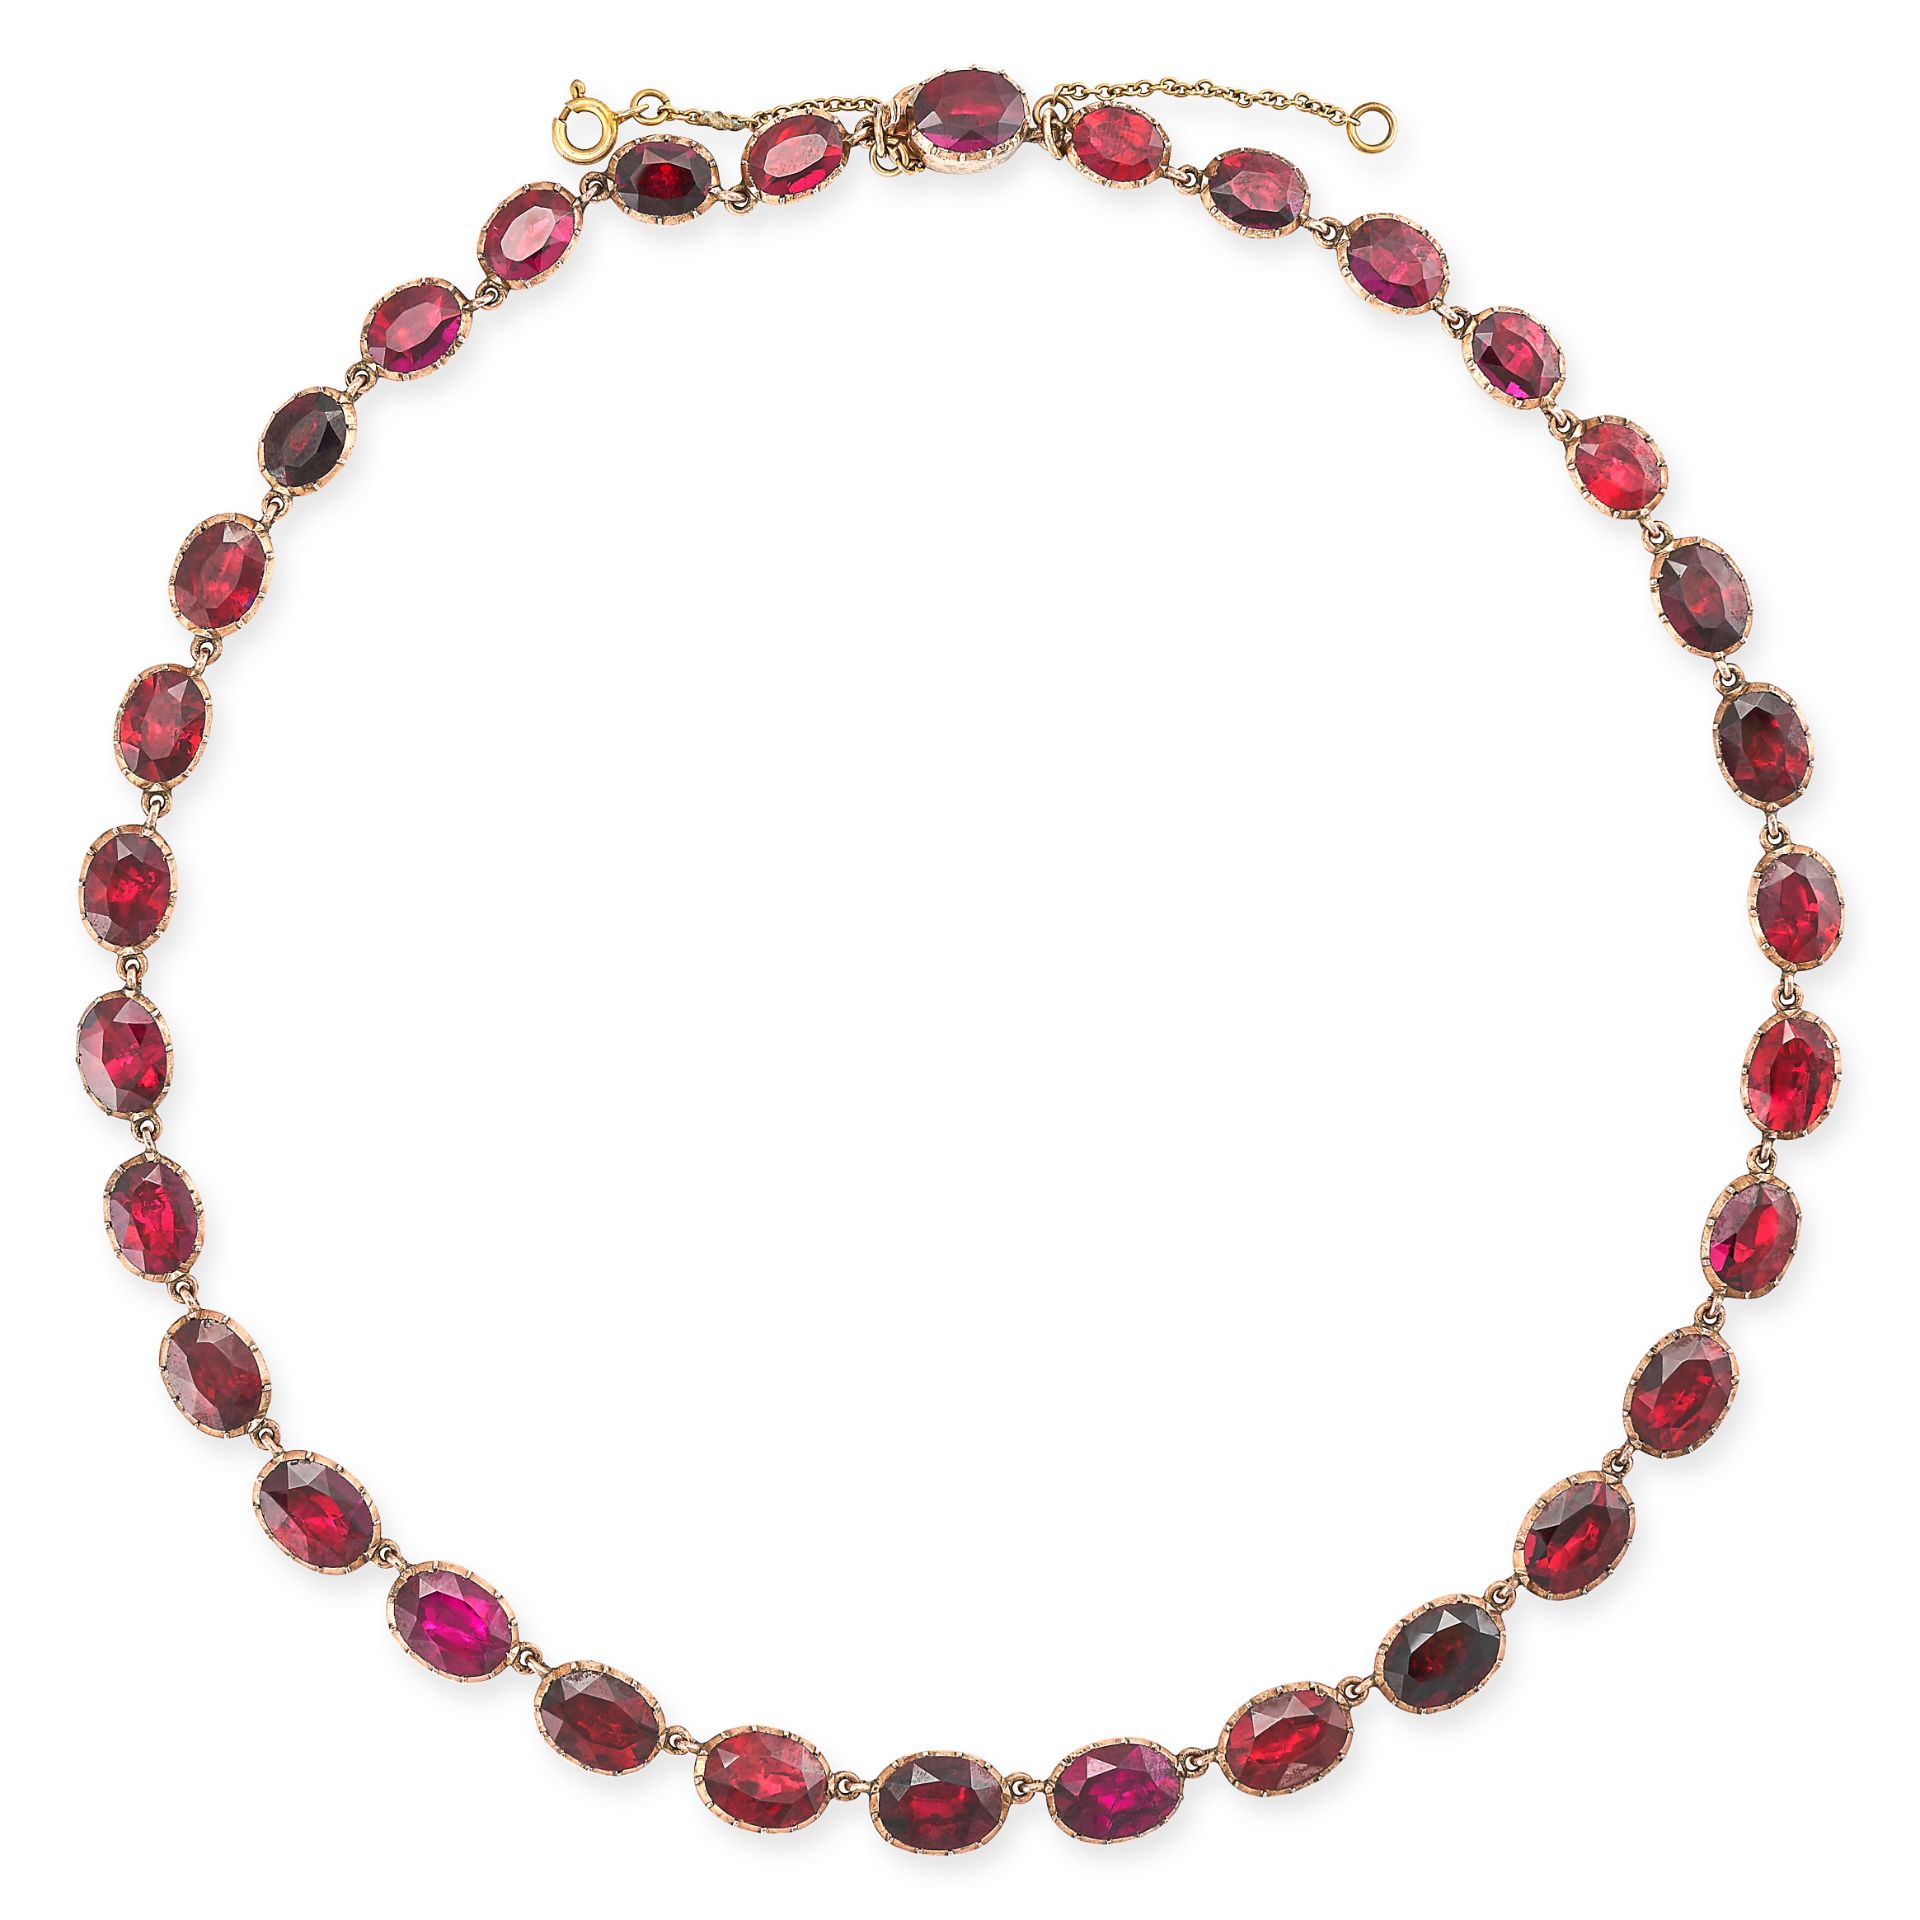 AN ANTIQUE GARNET RIVIERE NECKLACE, 19TH CENTURY in yellow gold, set with a single row of oval cut